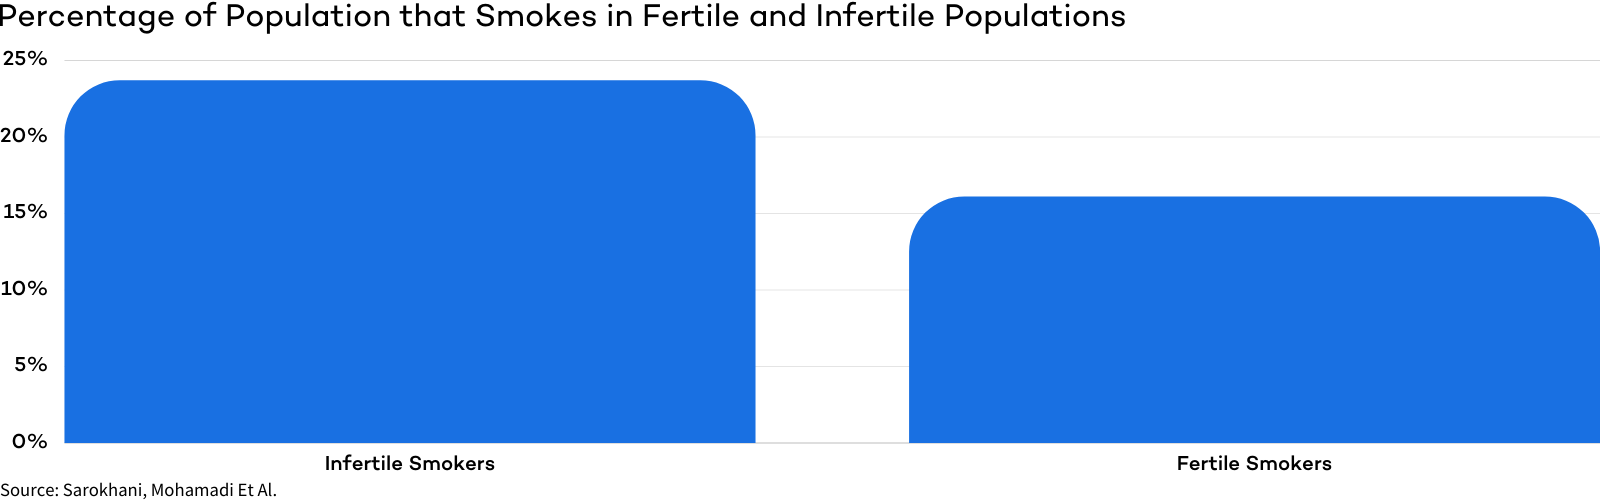 Smoking in Fertile and Infertile Populations graph